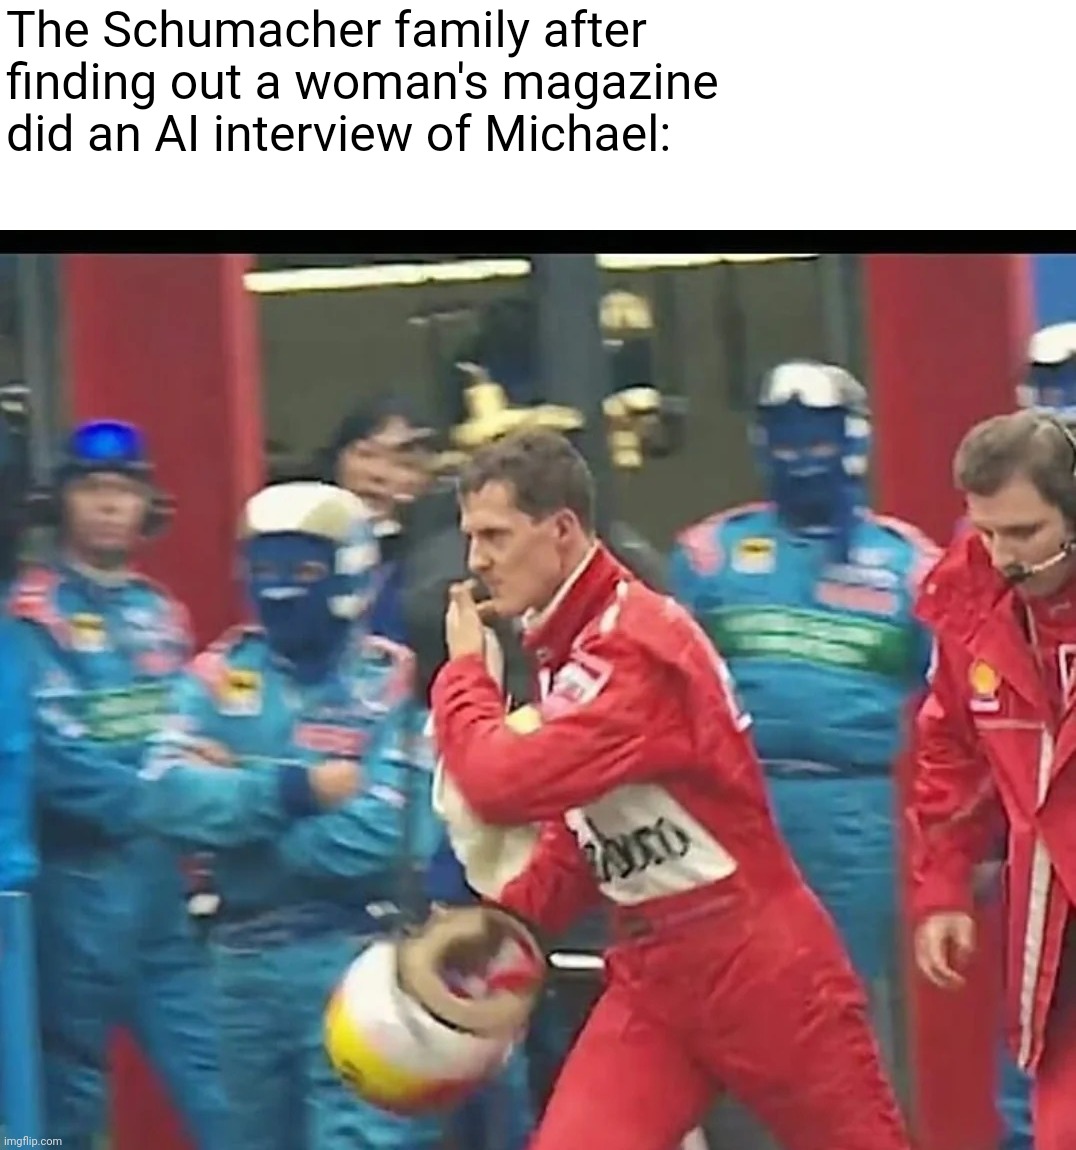 The Schumacher family after finding out a woman's magazine did an AI interview of Michael: | image tagged in formula 1,magazines,michael,family | made w/ Imgflip meme maker